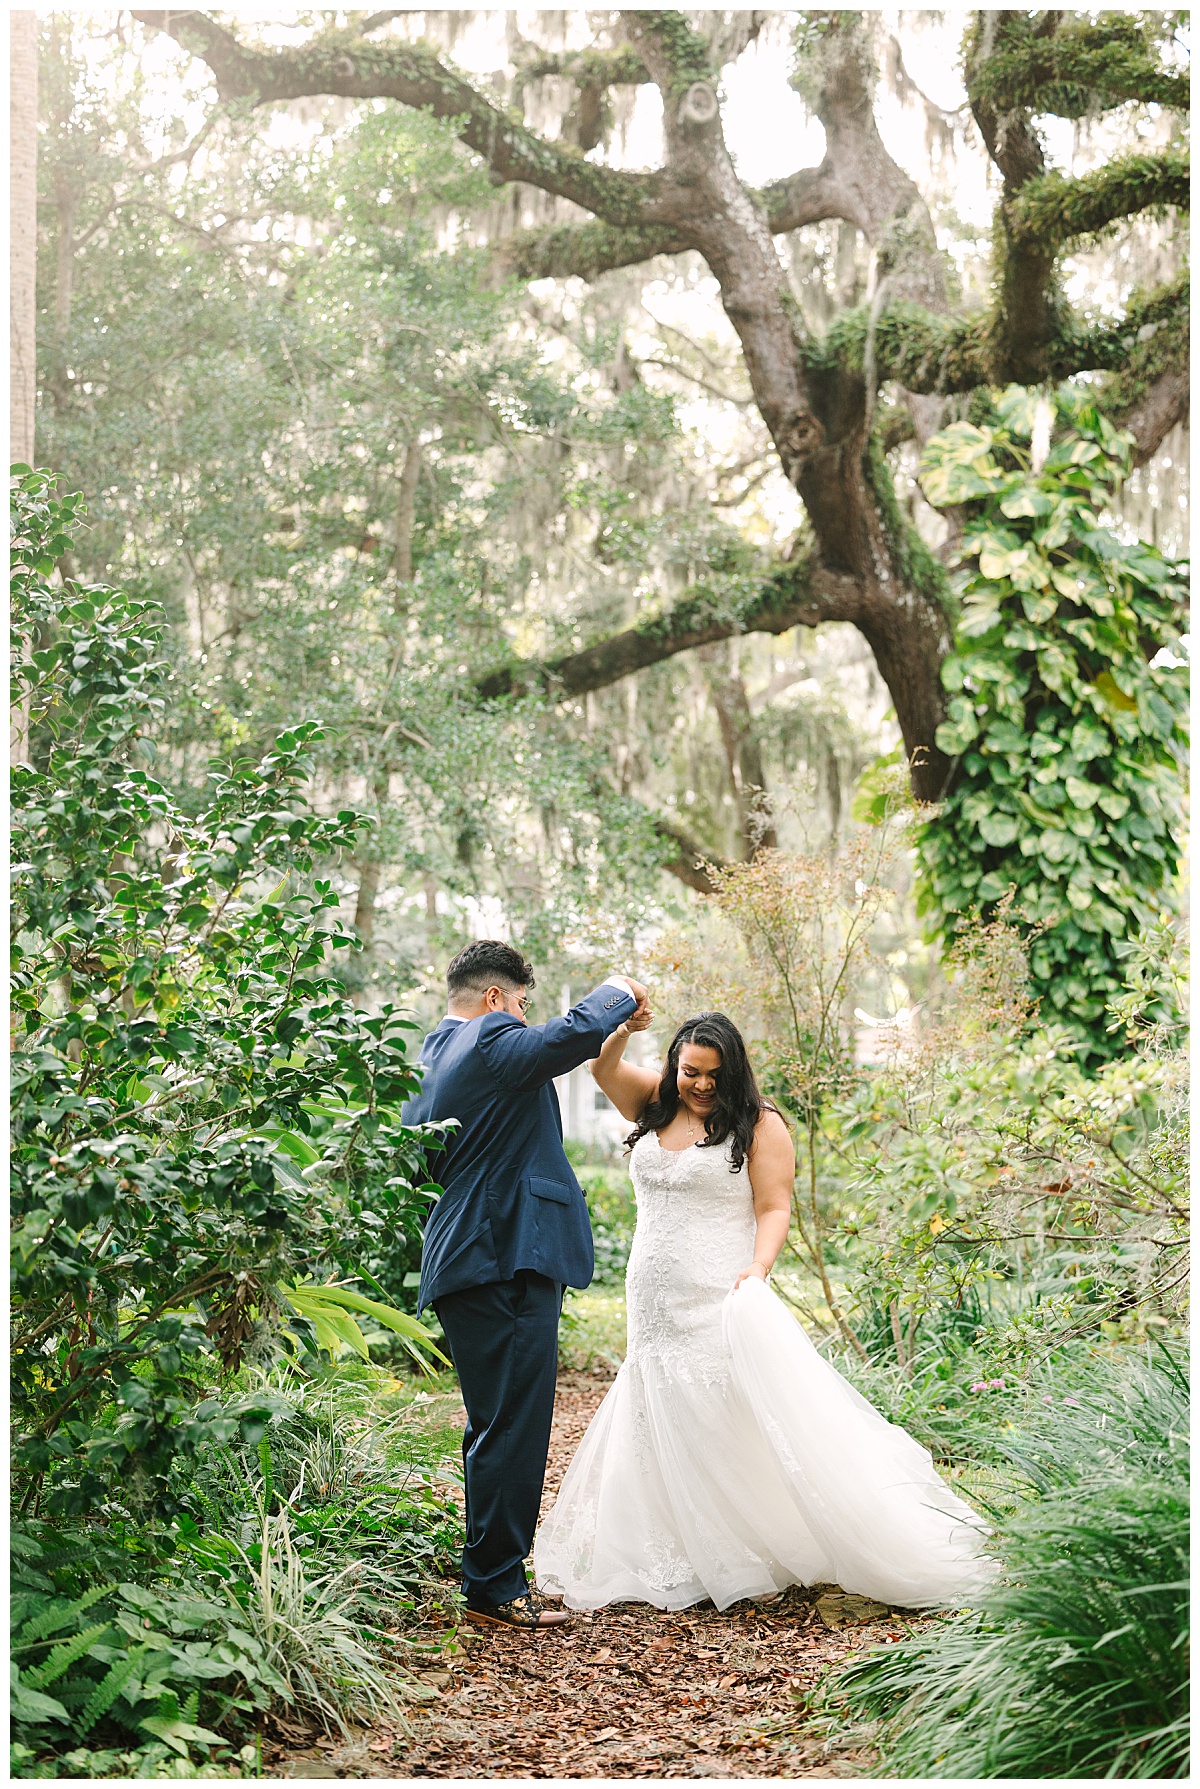 A Florida man twirls his bride in her wedding gown around near Spanish Moss covered trees.